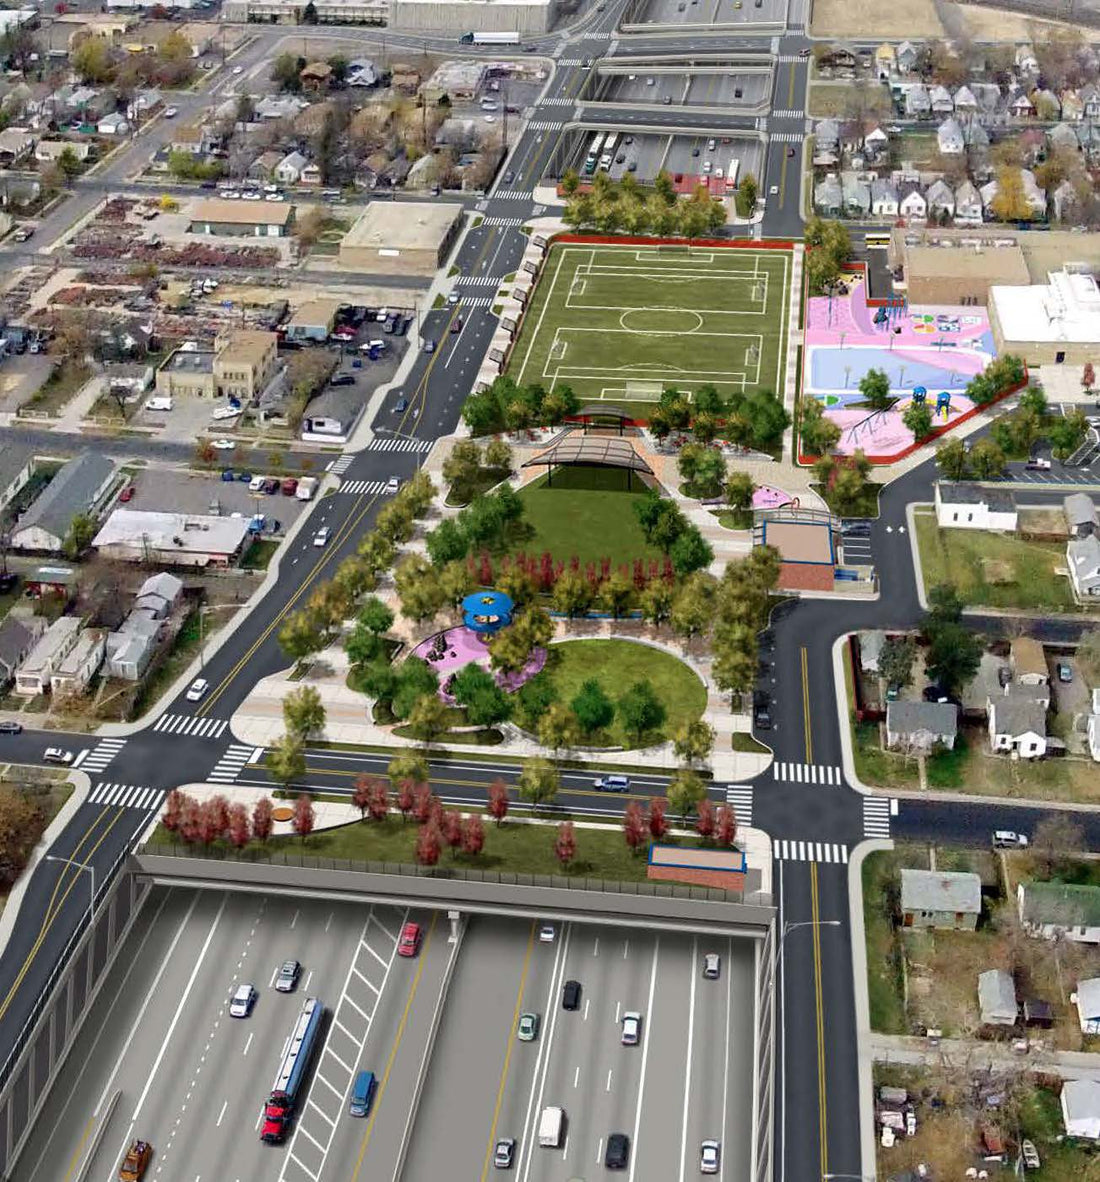 Rendering of 4 acre park on top of I-70